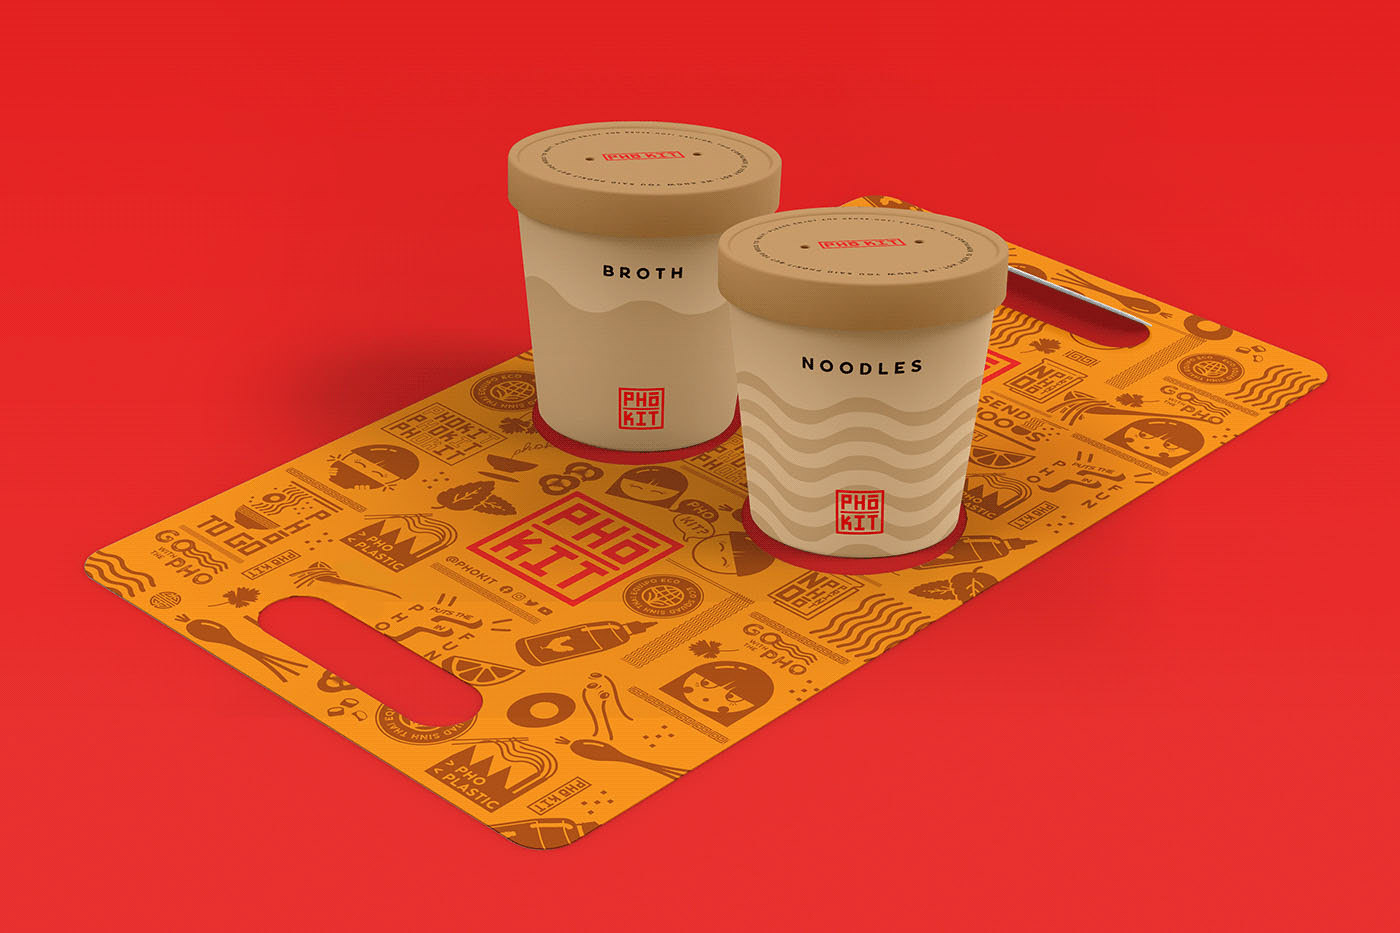 package design agency rockford il - pho-kit packaging